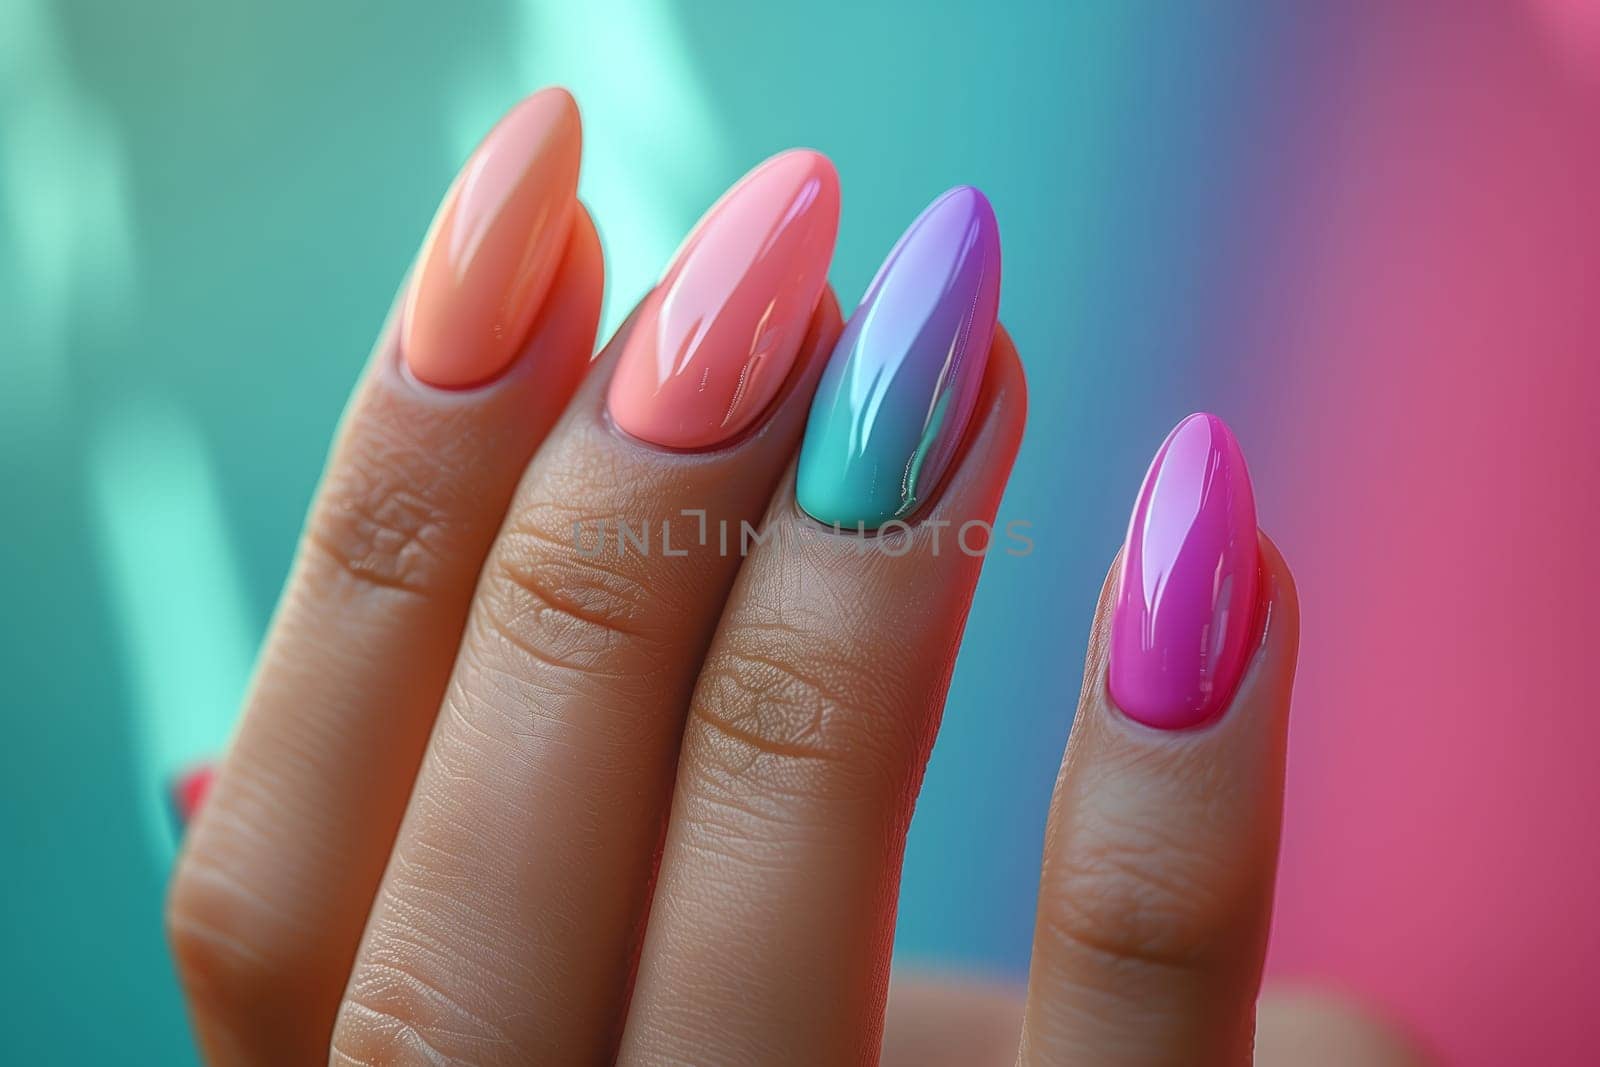 A close up of a womans hand showcasing colorful nail polish in shades of pink and azure, emphasizing nail care and manicure gesture with liquid nail polish